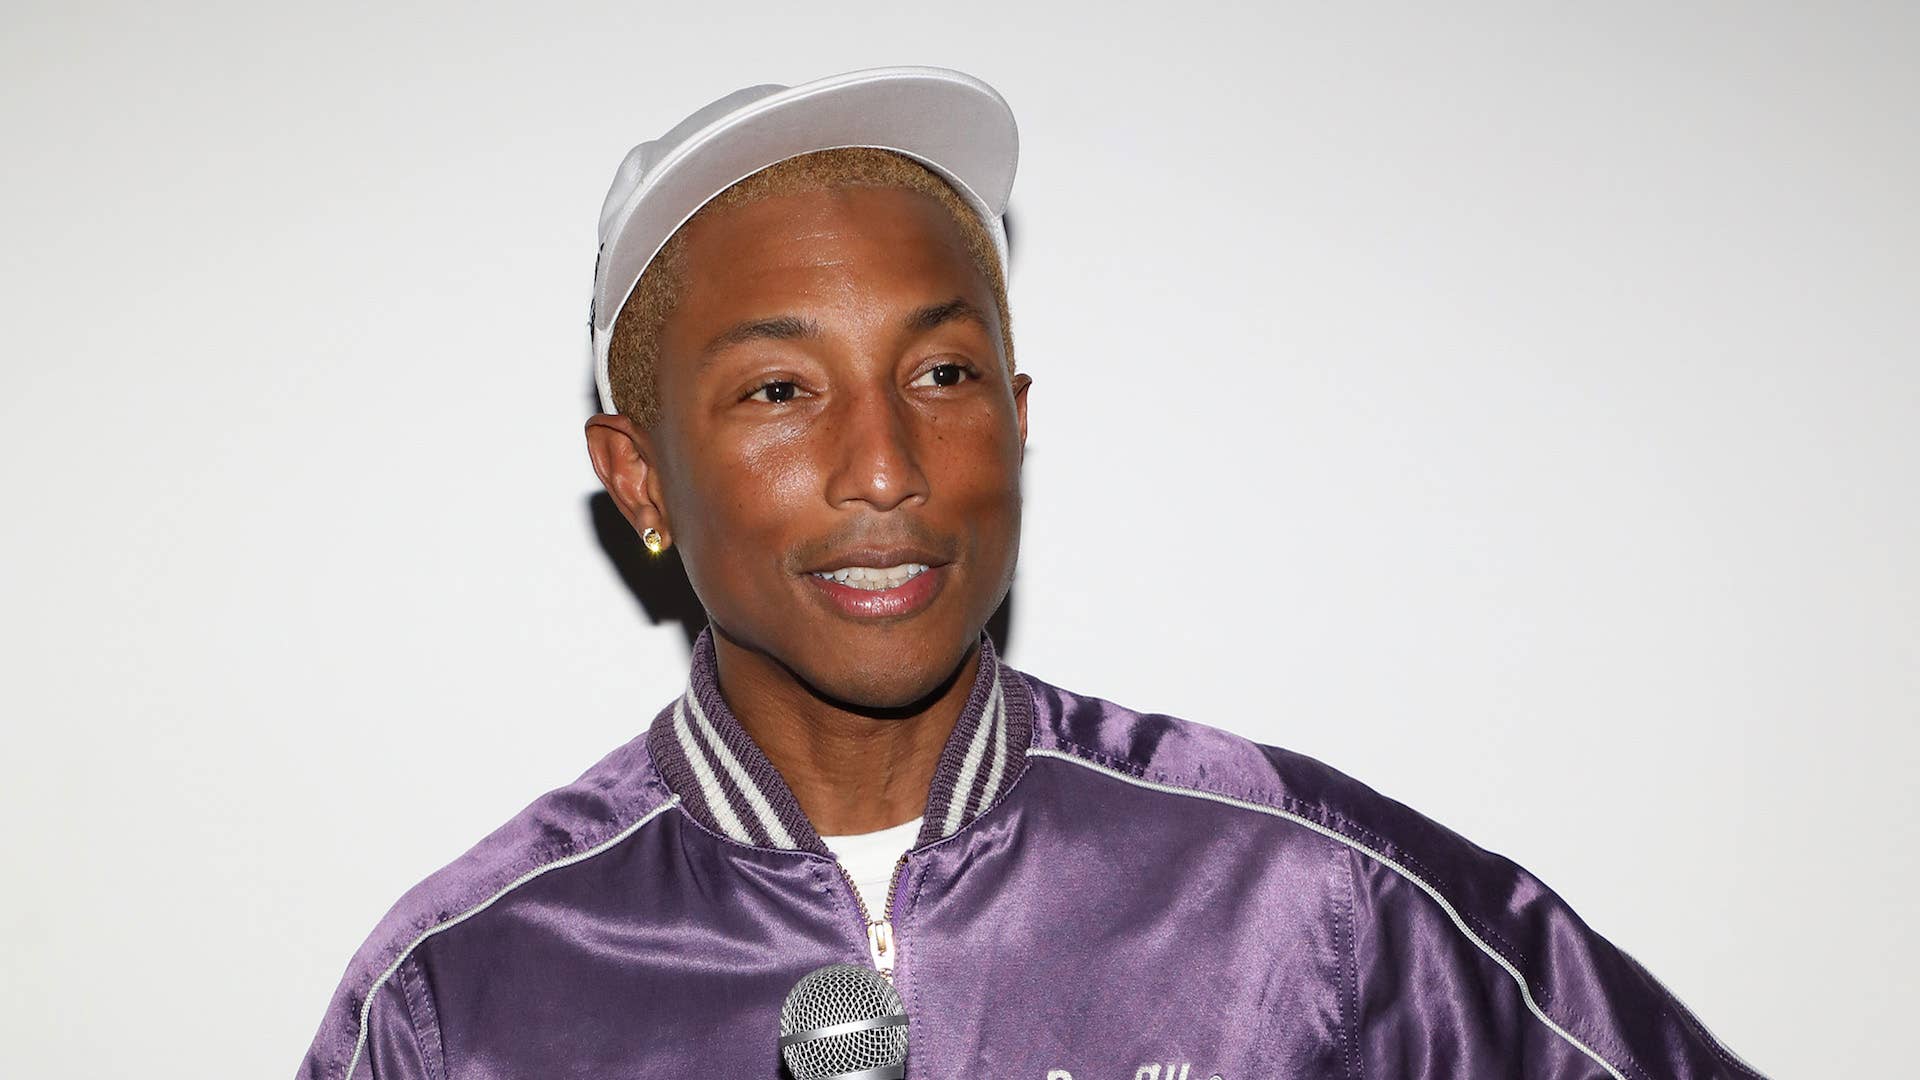 Pharell WIlliams attends the Richard Mille Celebration